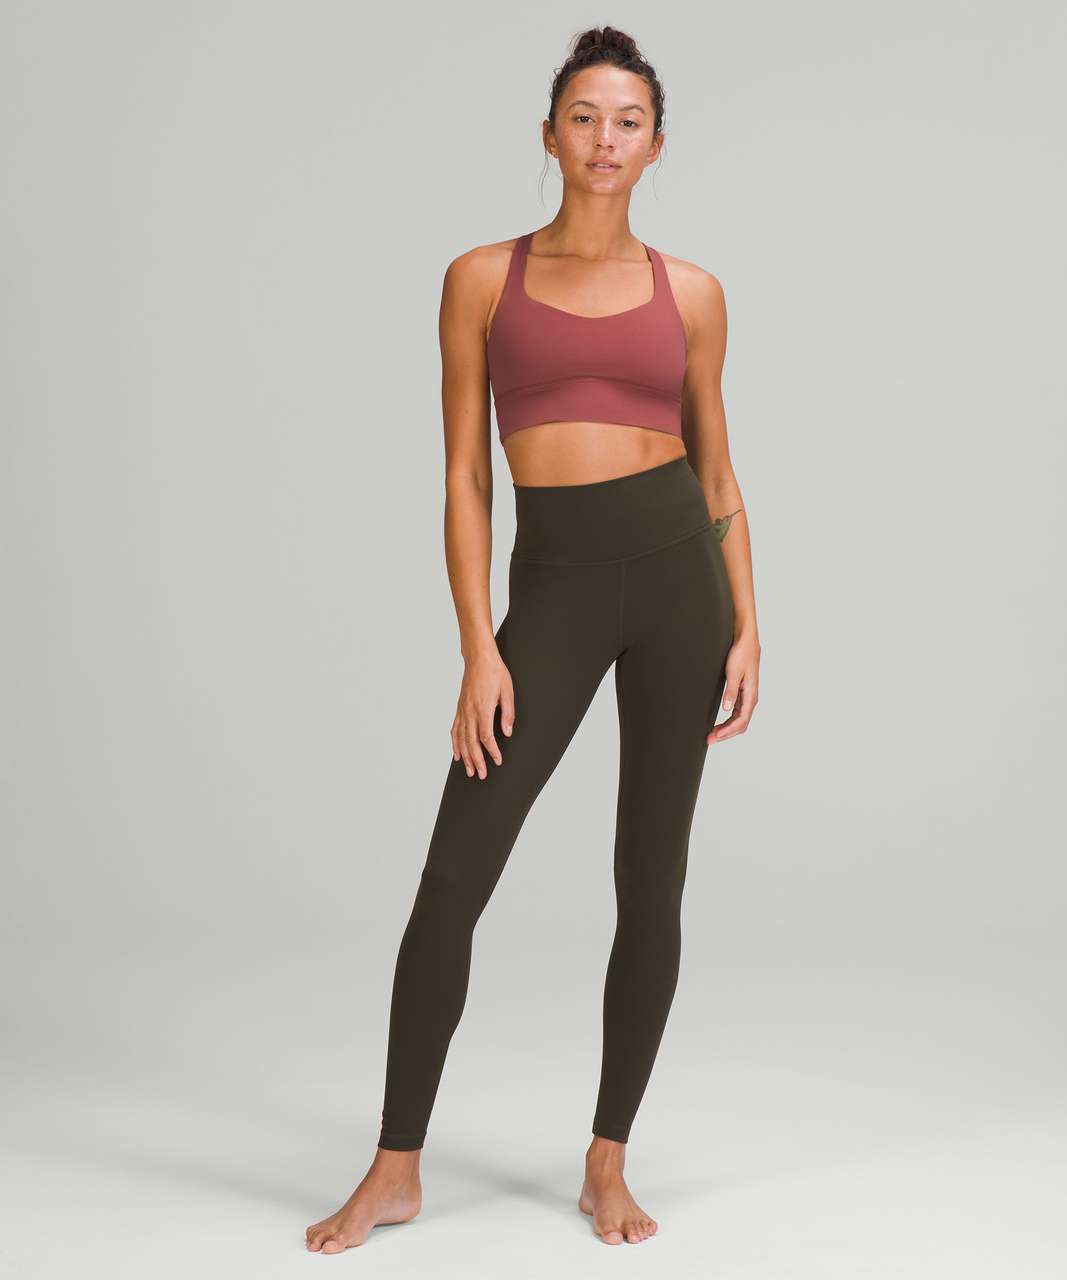 Lululemon Free to Be Longline Bra - Wild *Light Support, A/B Cup - Smoky Red